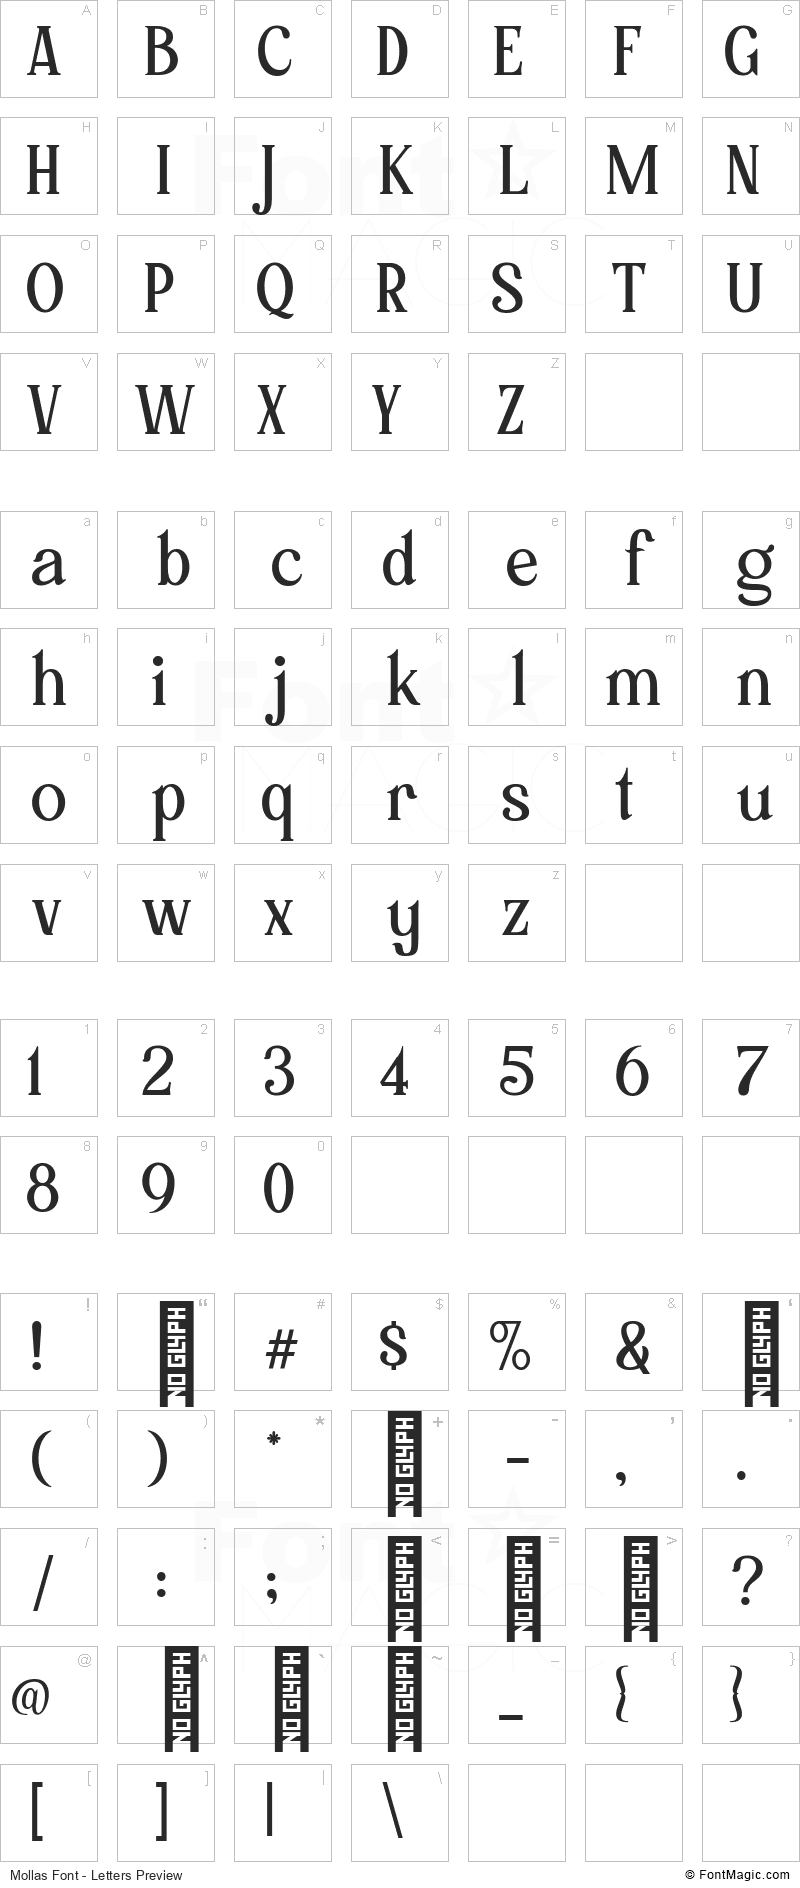 Mollas Font - All Latters Preview Chart